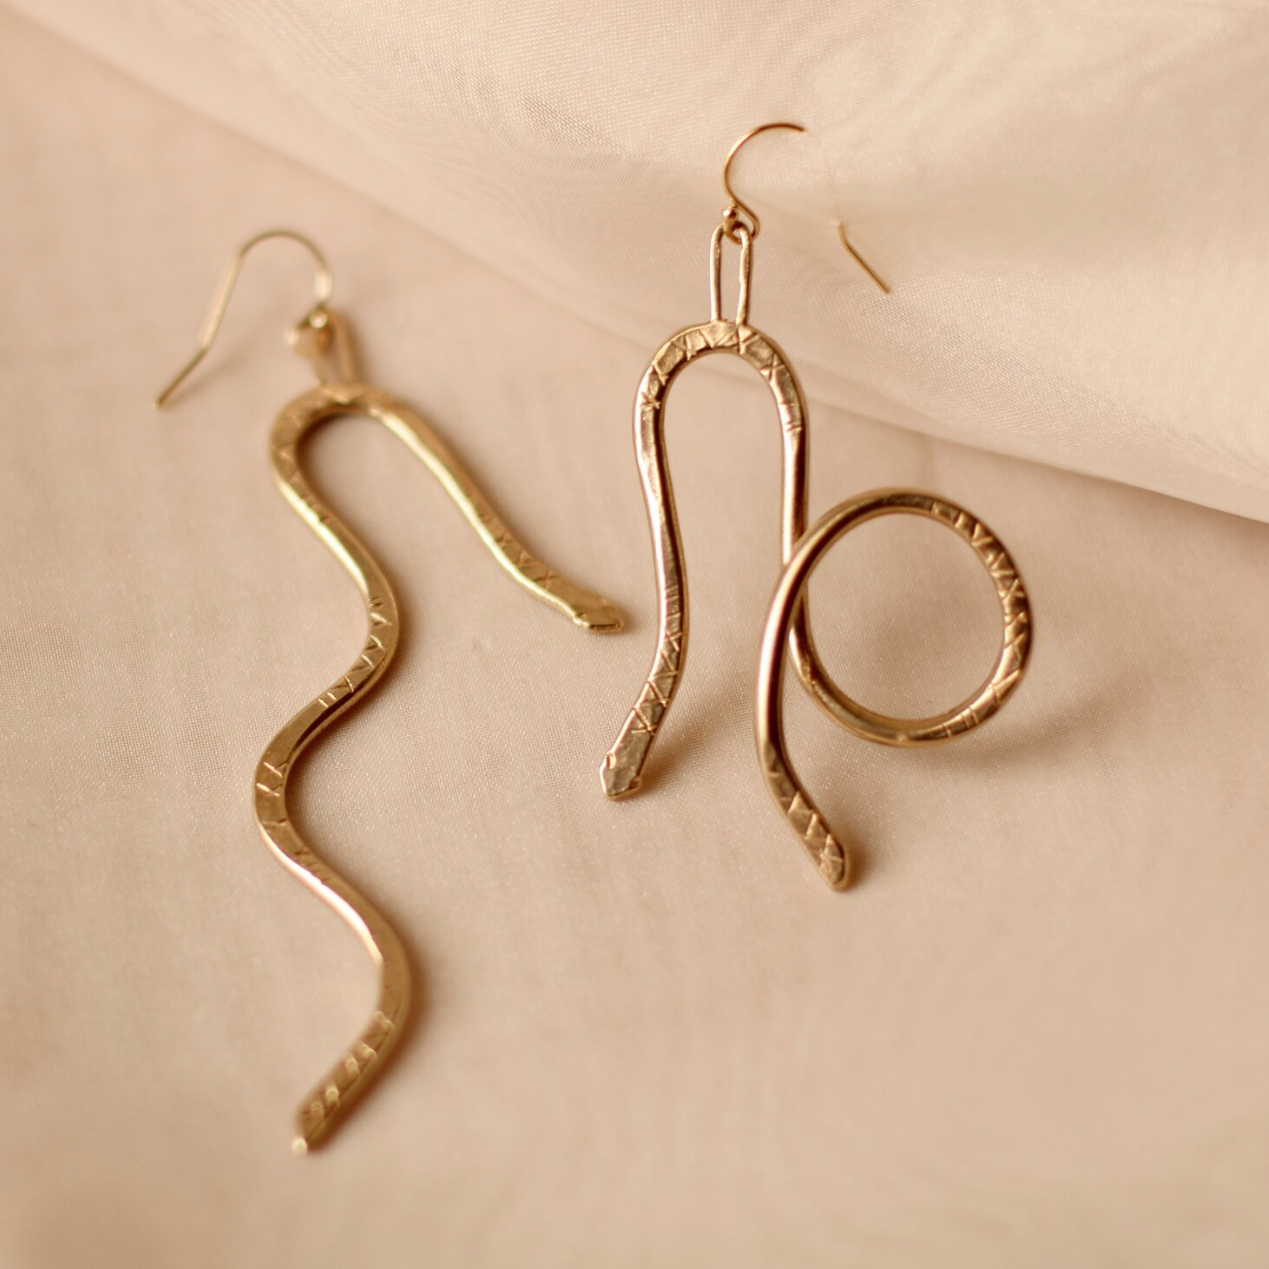 Cire’ Alexandria | Mismatched Snake Earrings